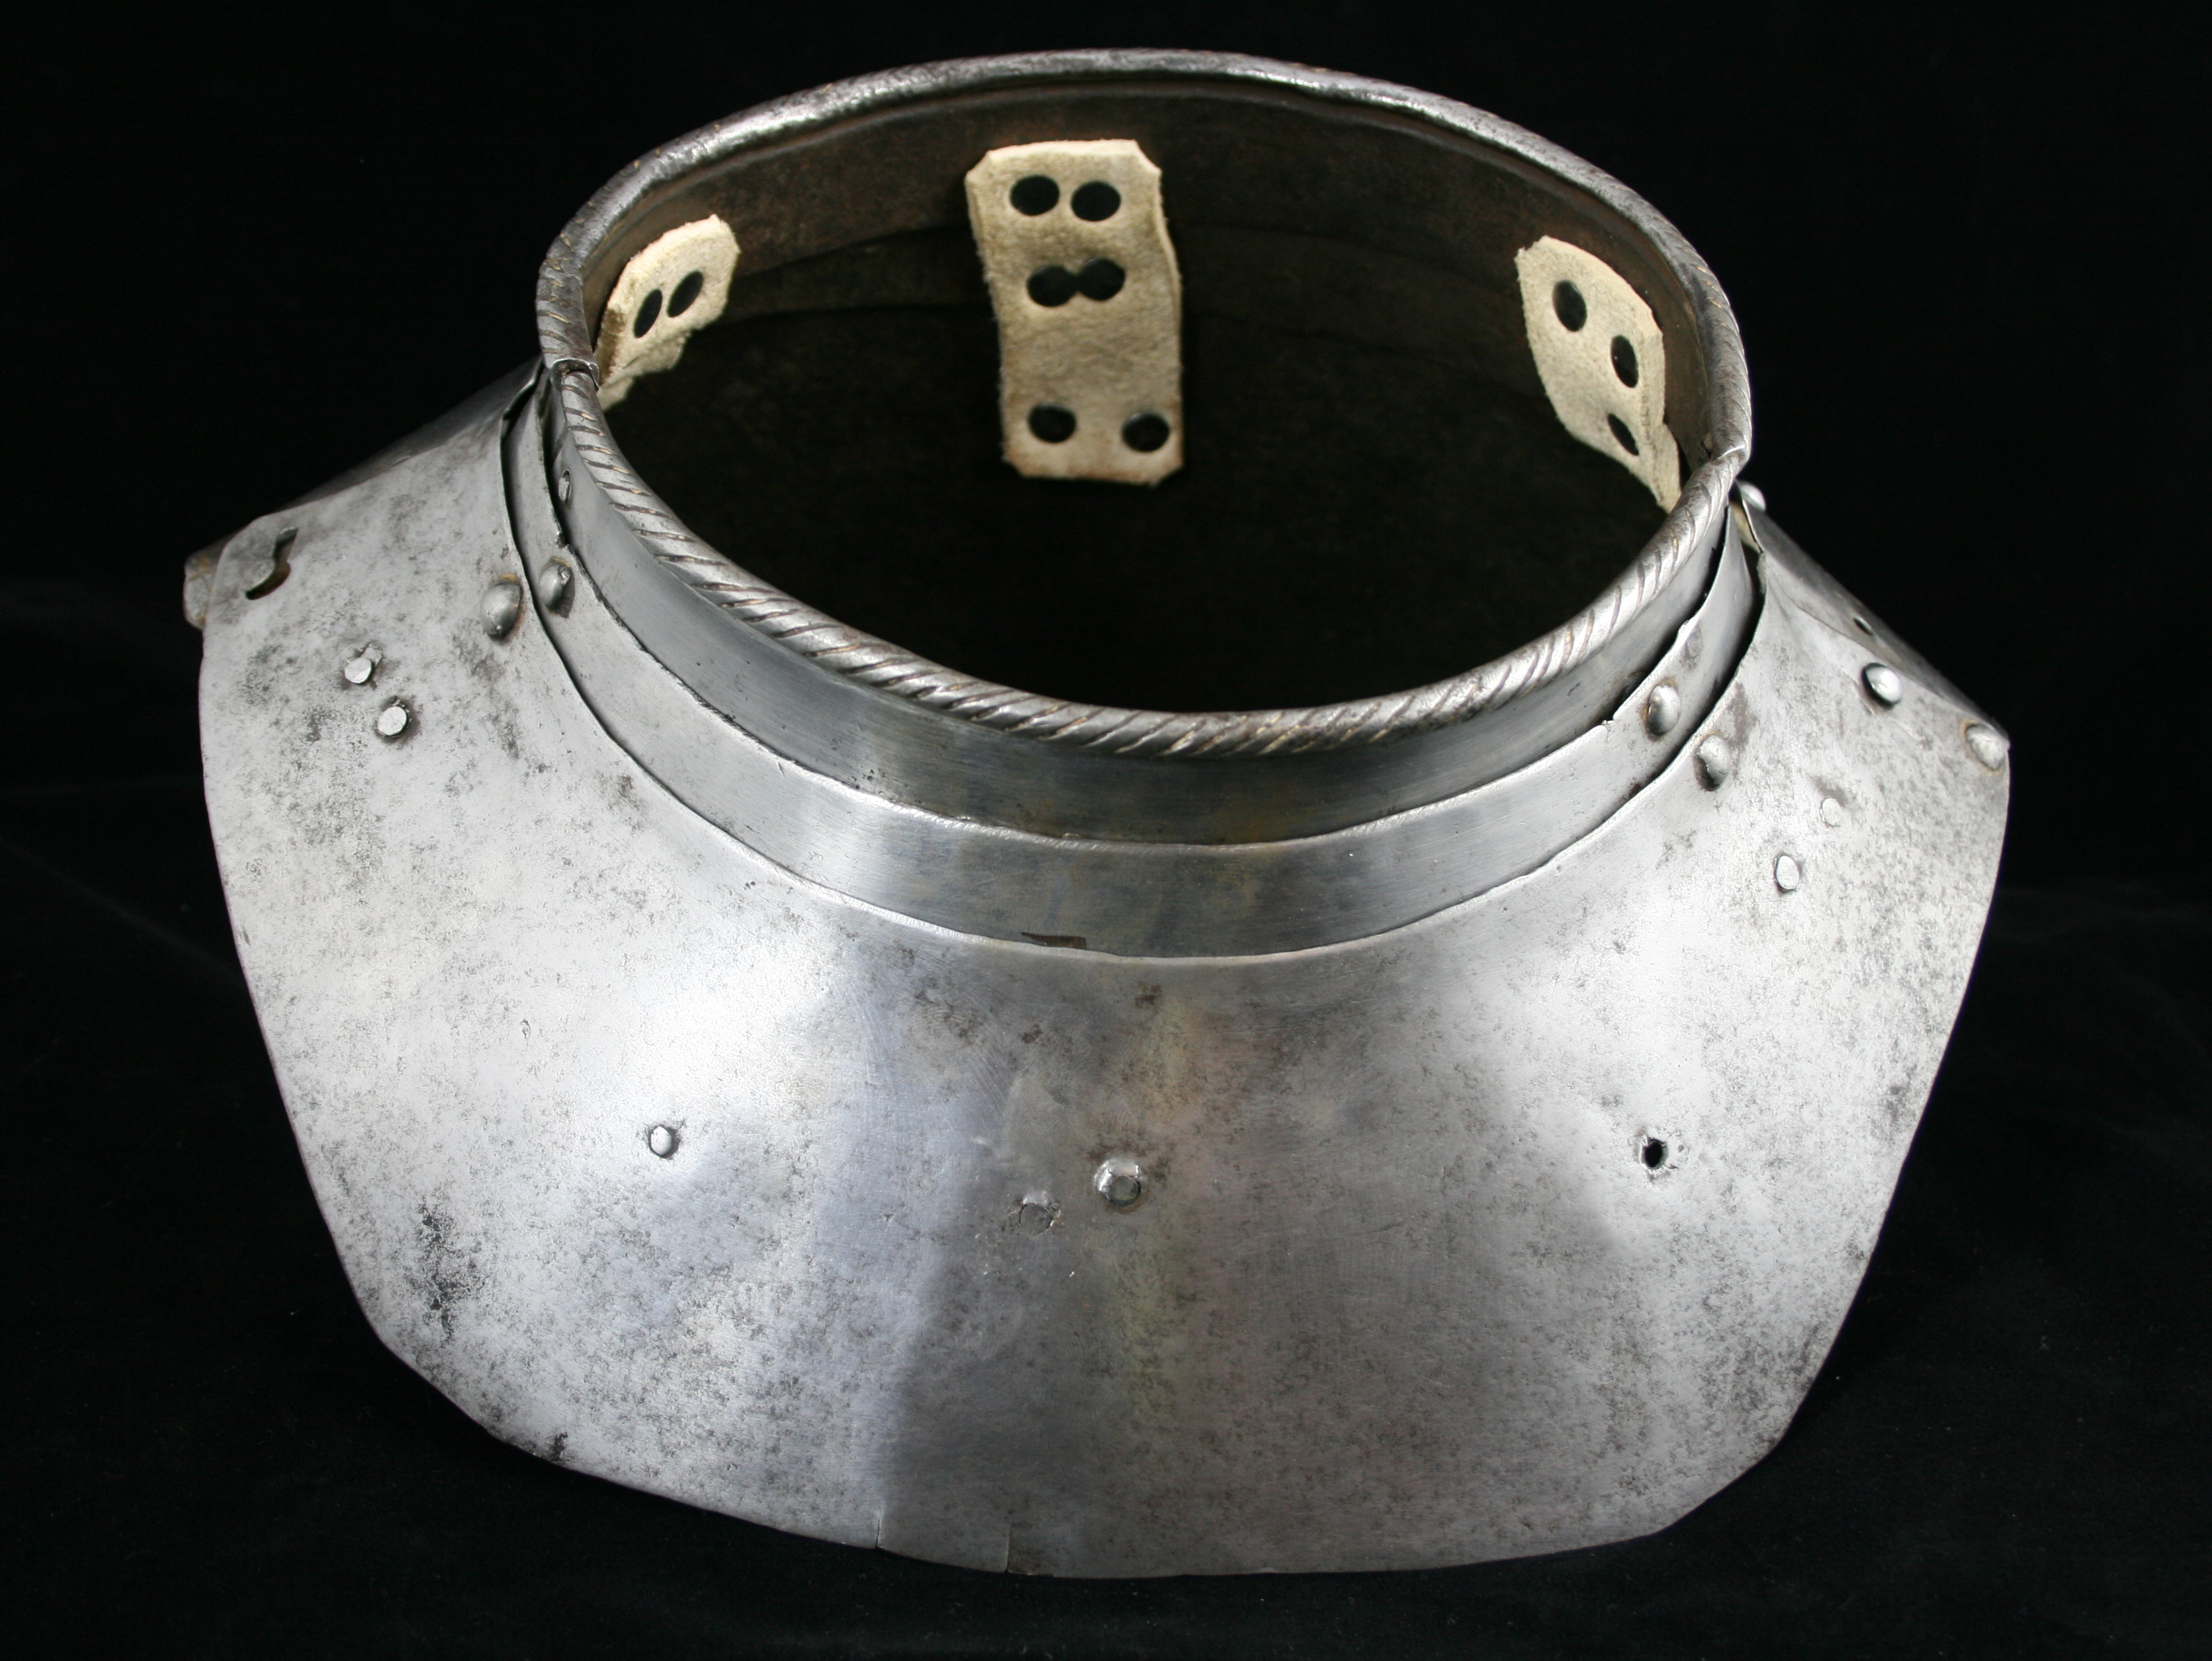 Gorget - A-159-front